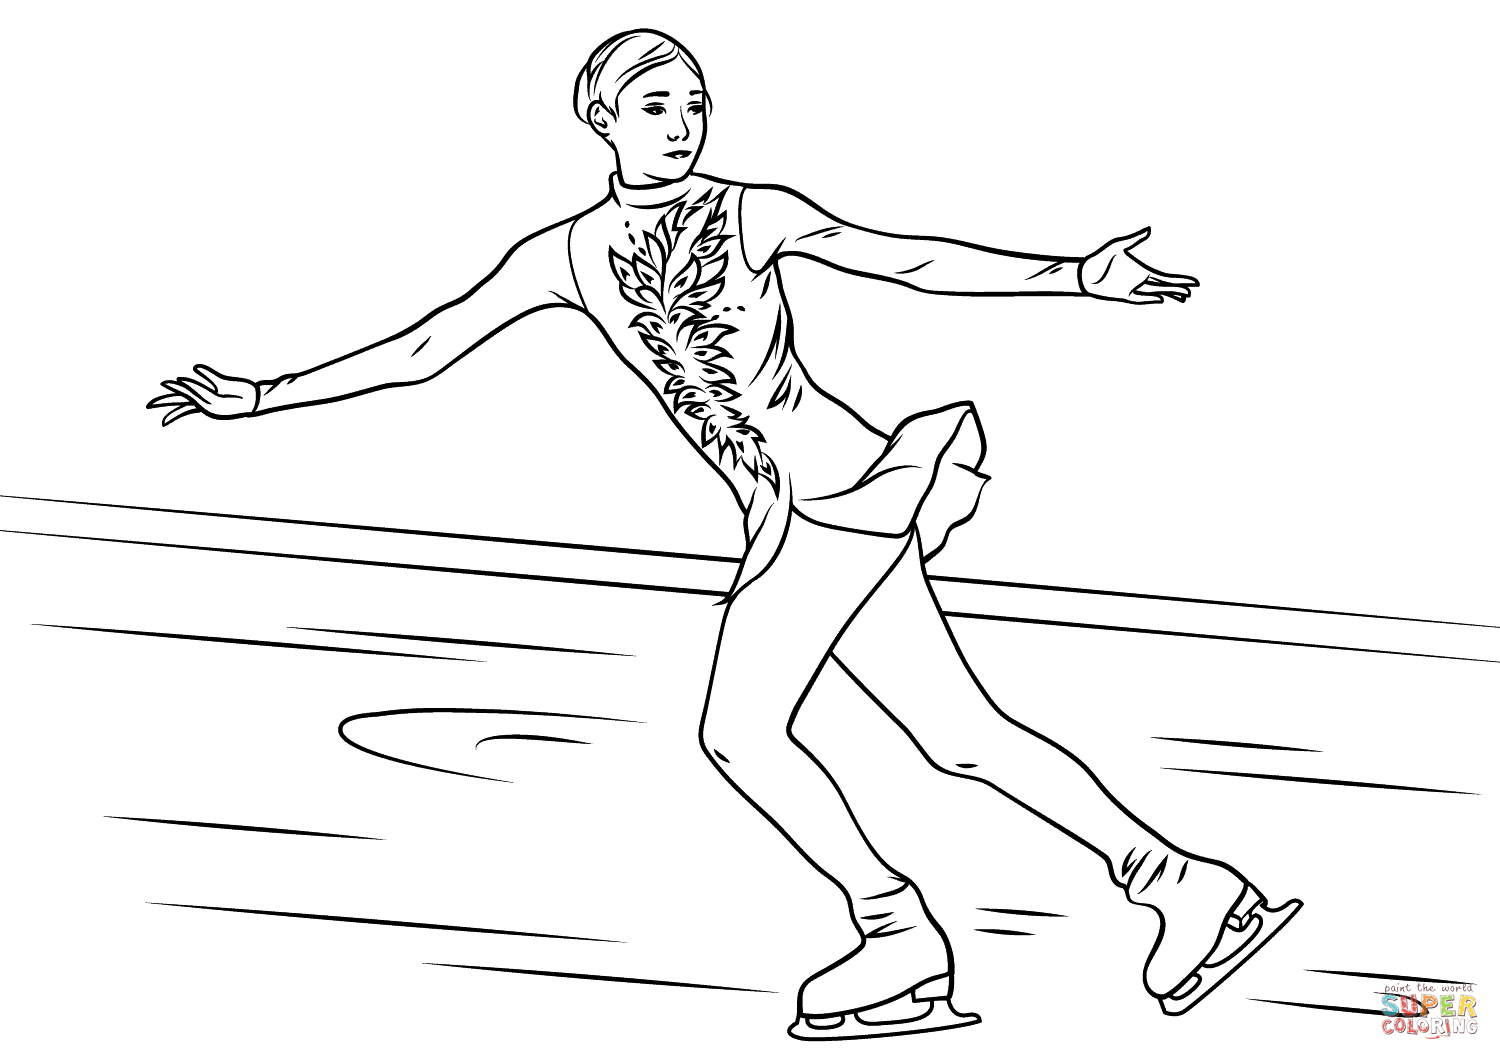 Ice skater coloring page free printable coloring pages